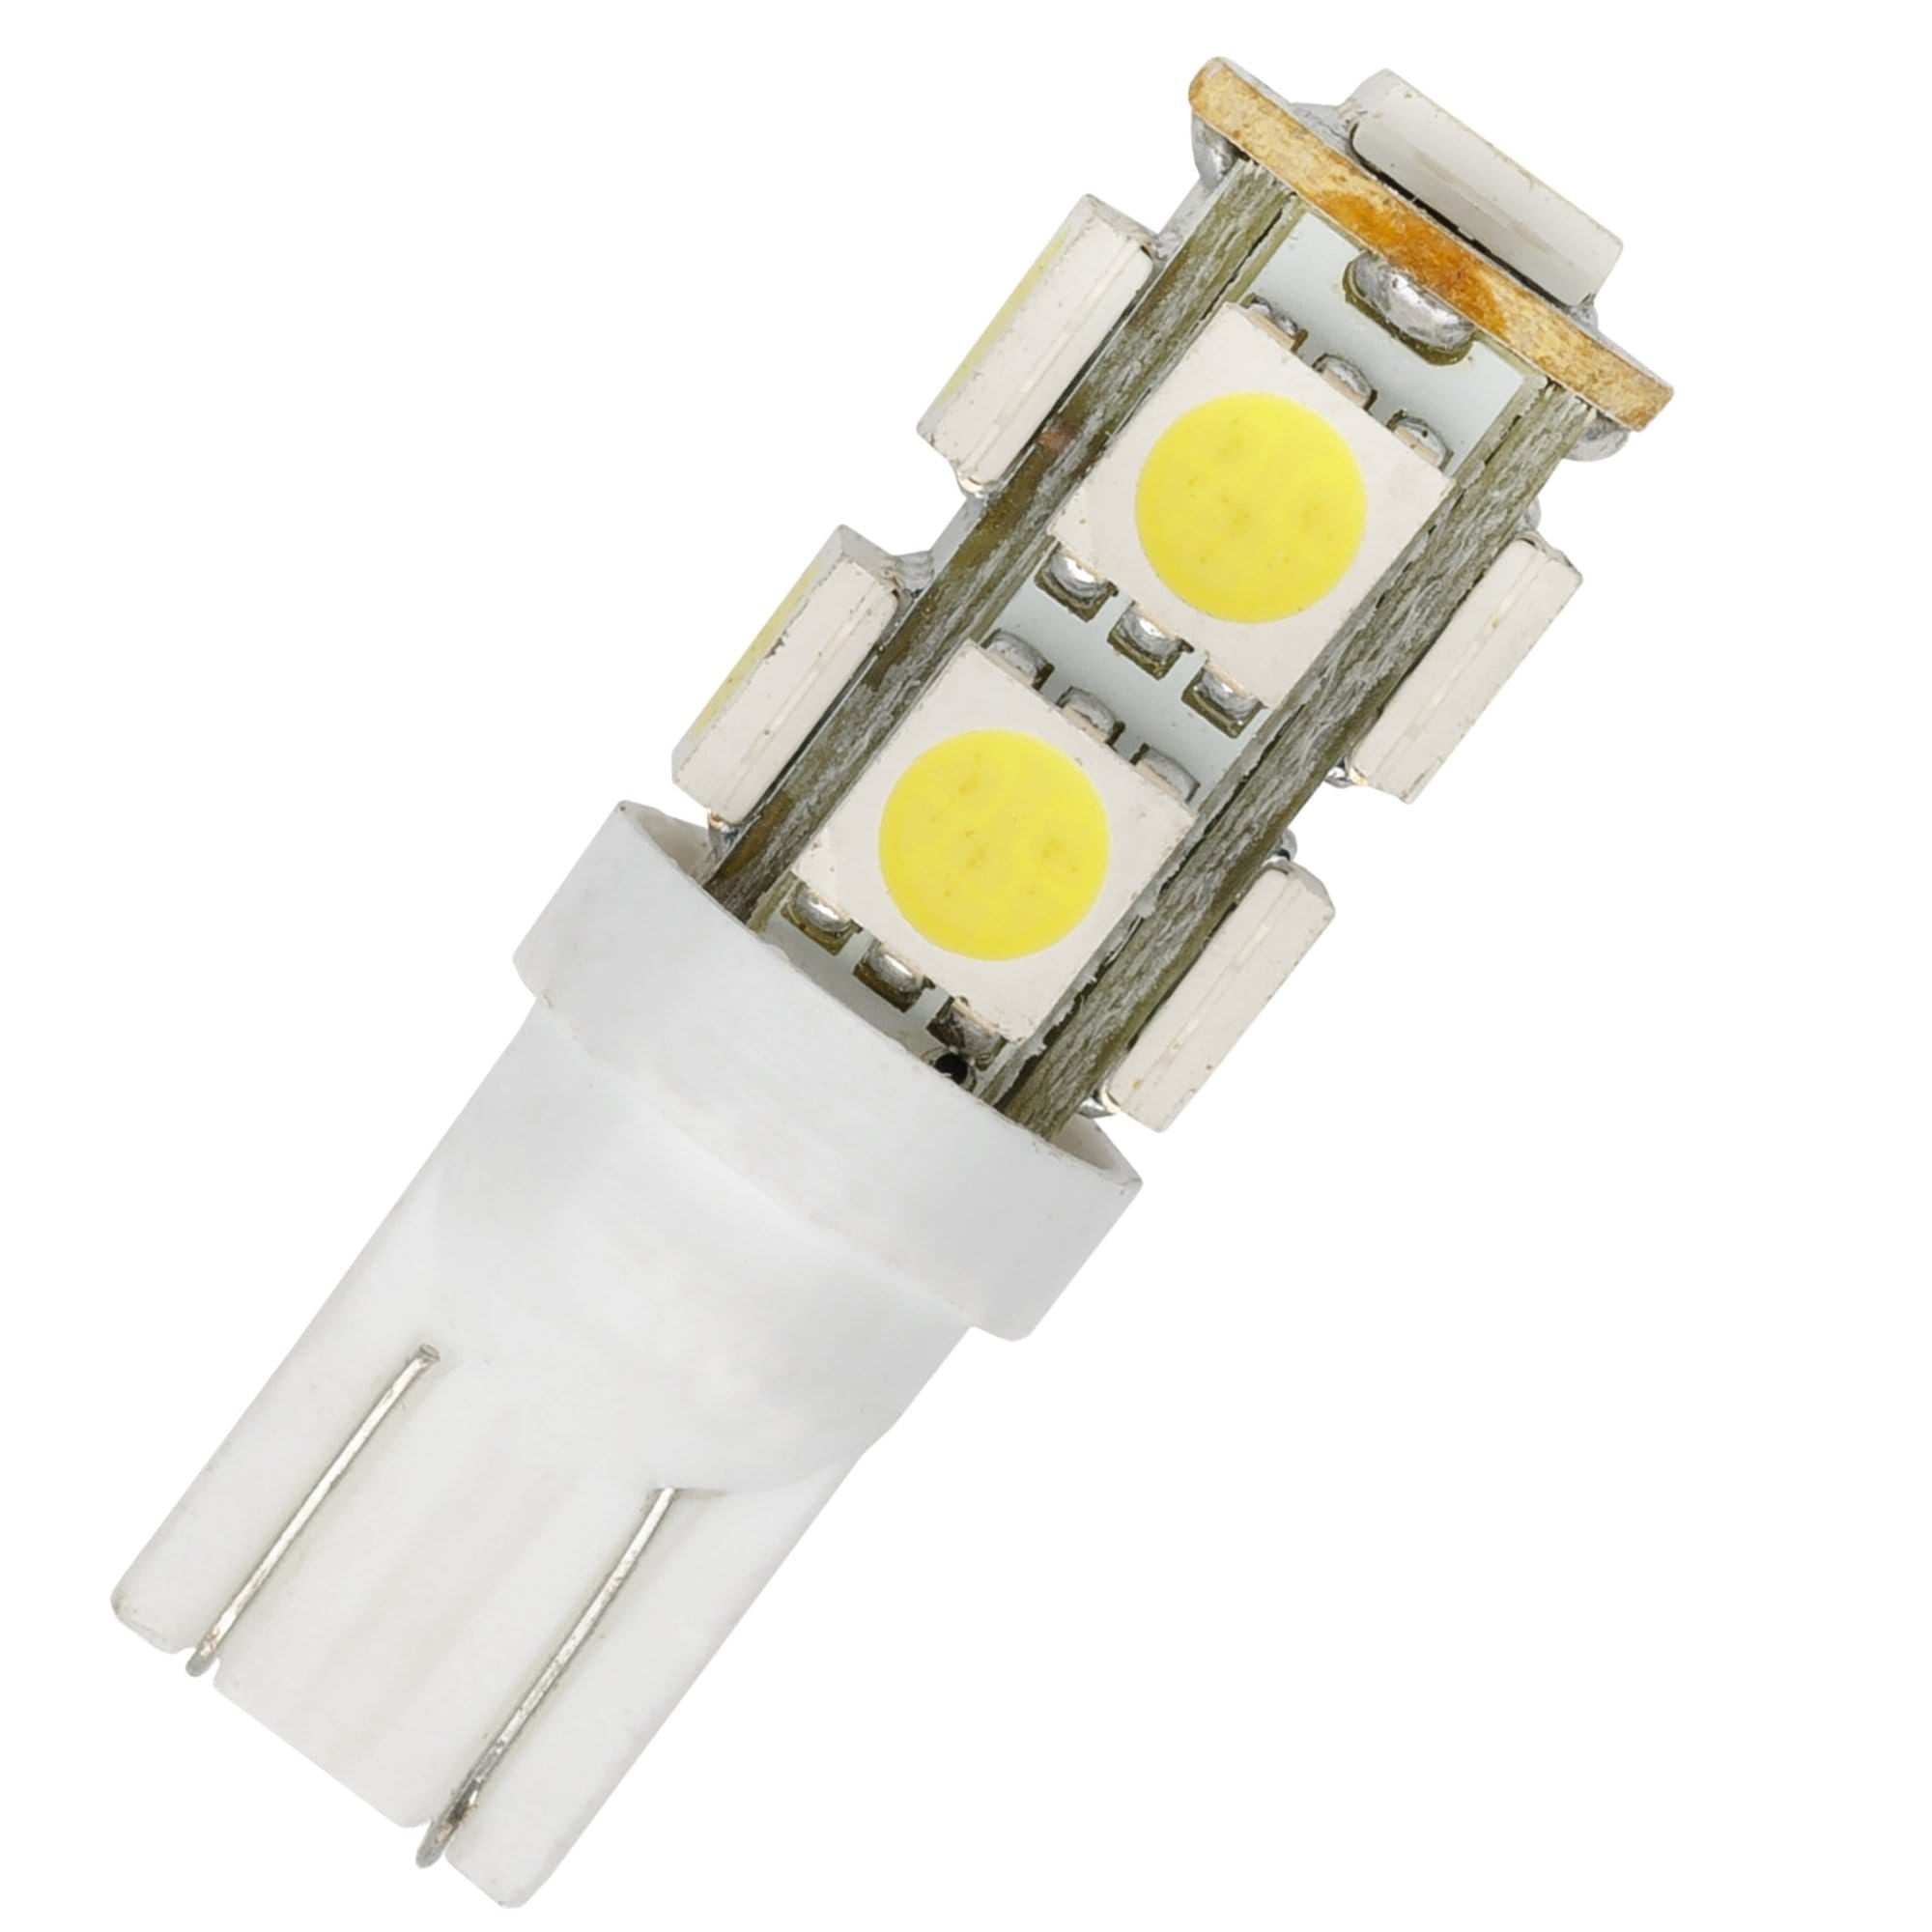 AP Products 016-781921 Star Lights Series Wedge 921 D.F. Base 135 Lms Tower LED Bulb